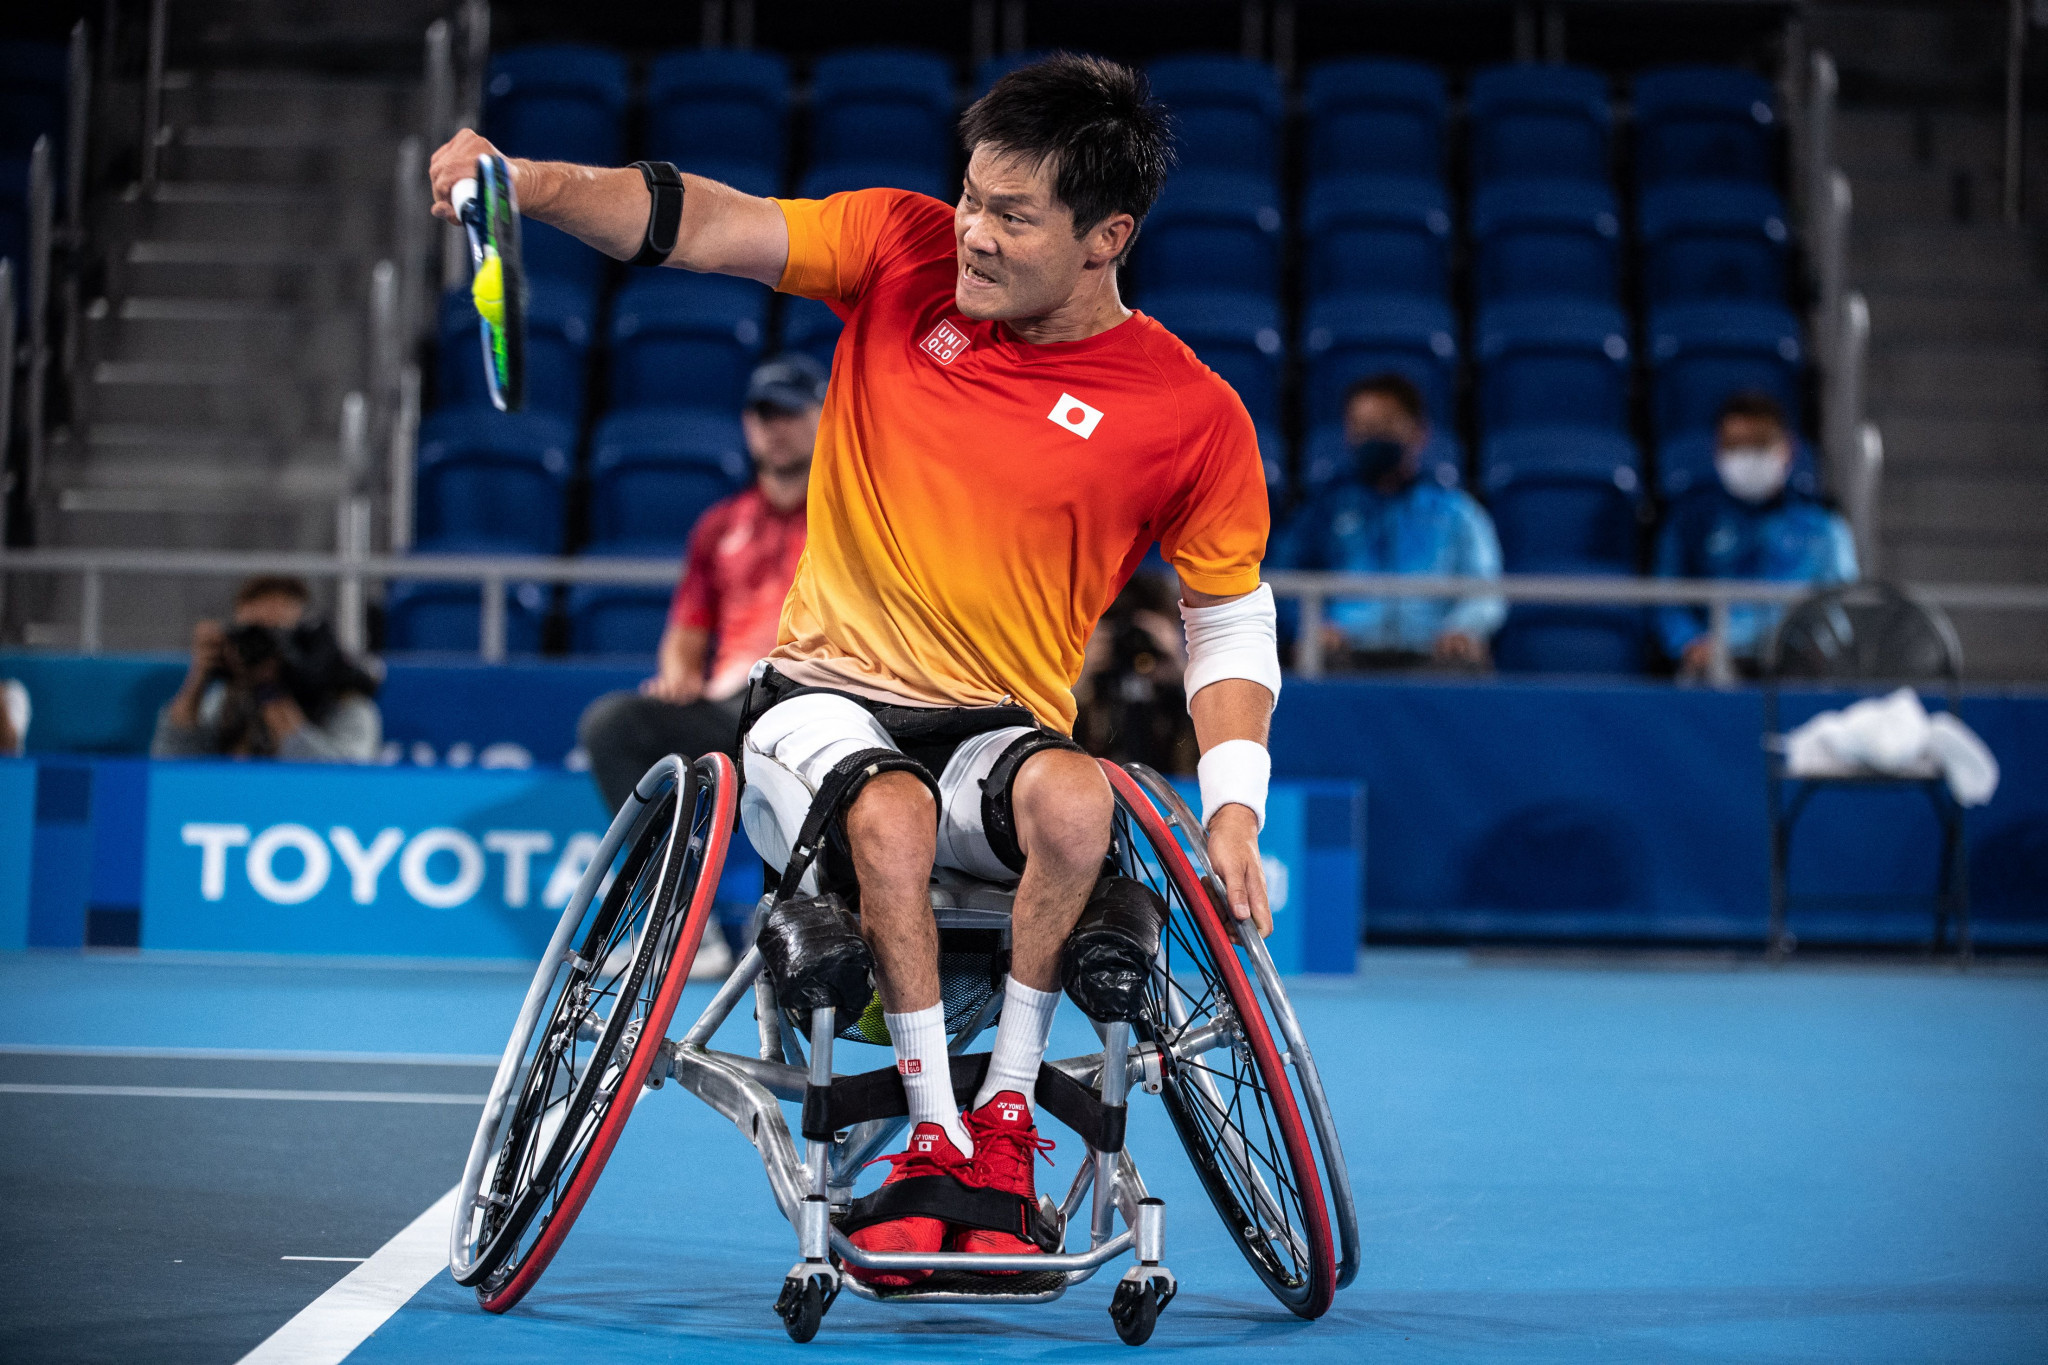 Japan primed to stop Dutch domination of Wheelchair Tennis World Team Cup